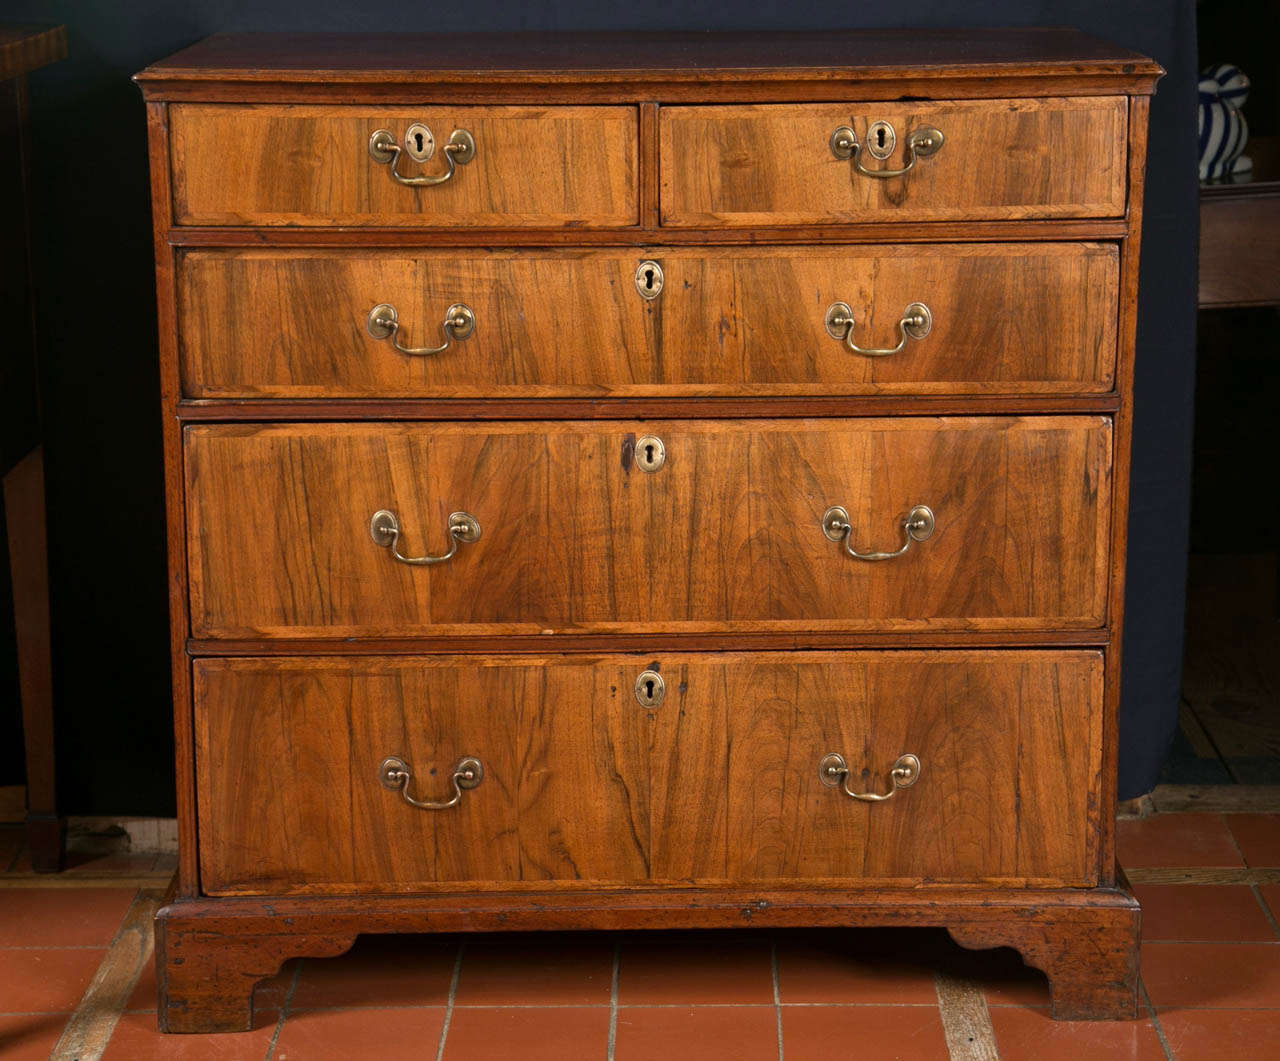 Herringbone crossbanding on each drawer front is a Classic dash of style on this medium-sized chest of five drawers on bracket feet. Not too big for use next to a large bed and not too small for and entryway, it could find a home just about anywhere